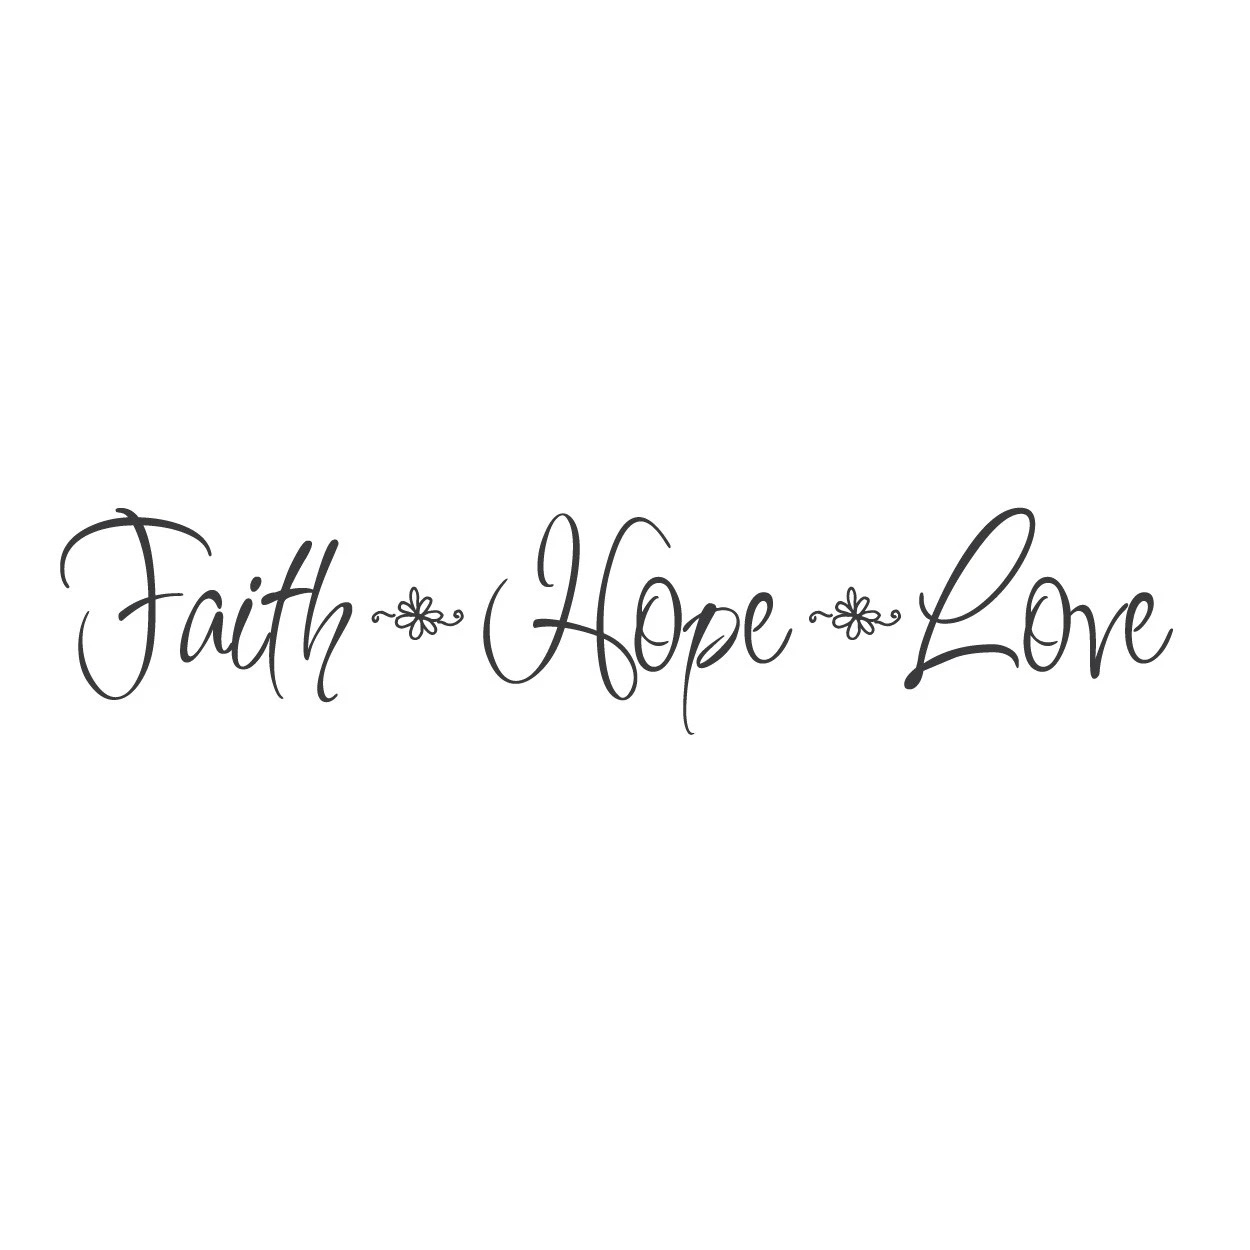 Collection 98+ Pictures Images Of Faith Hope And Love Updated